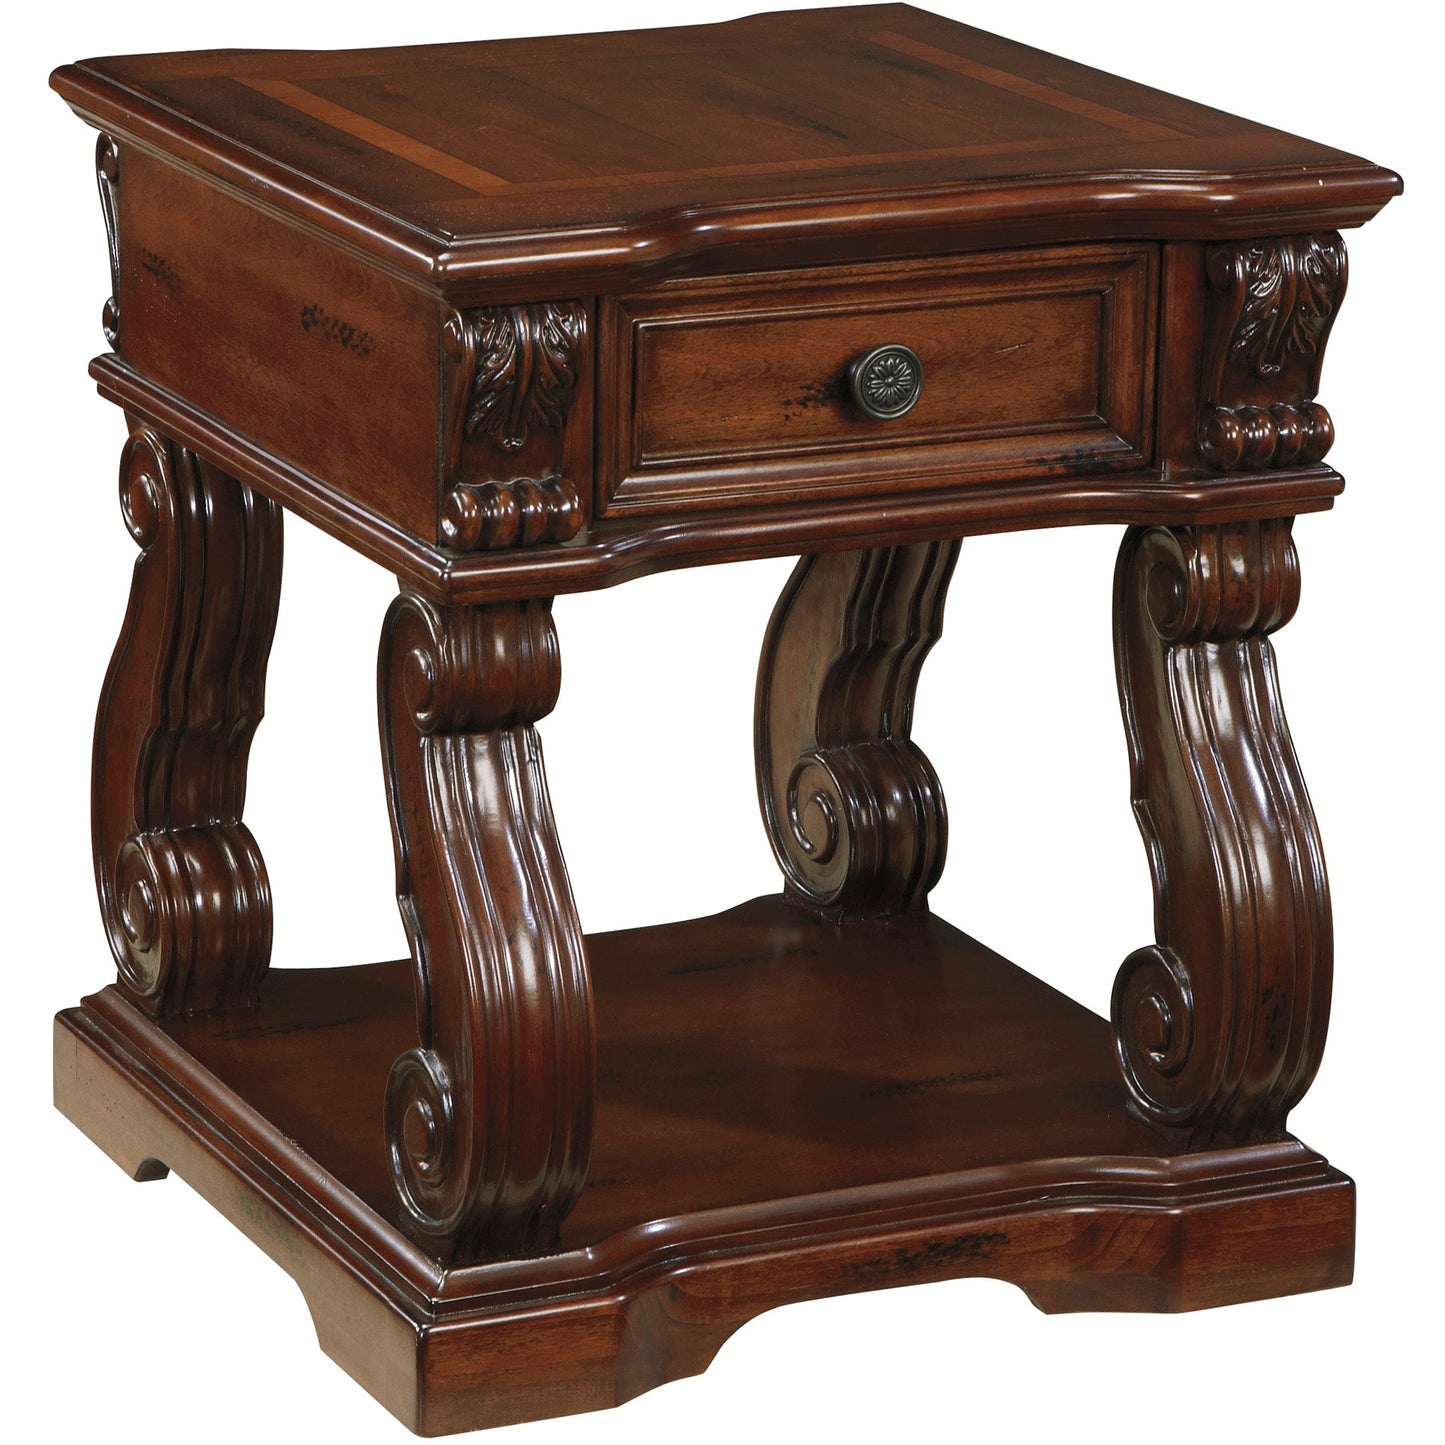 ALYMERE END TABLE - RUSTIC BROWN